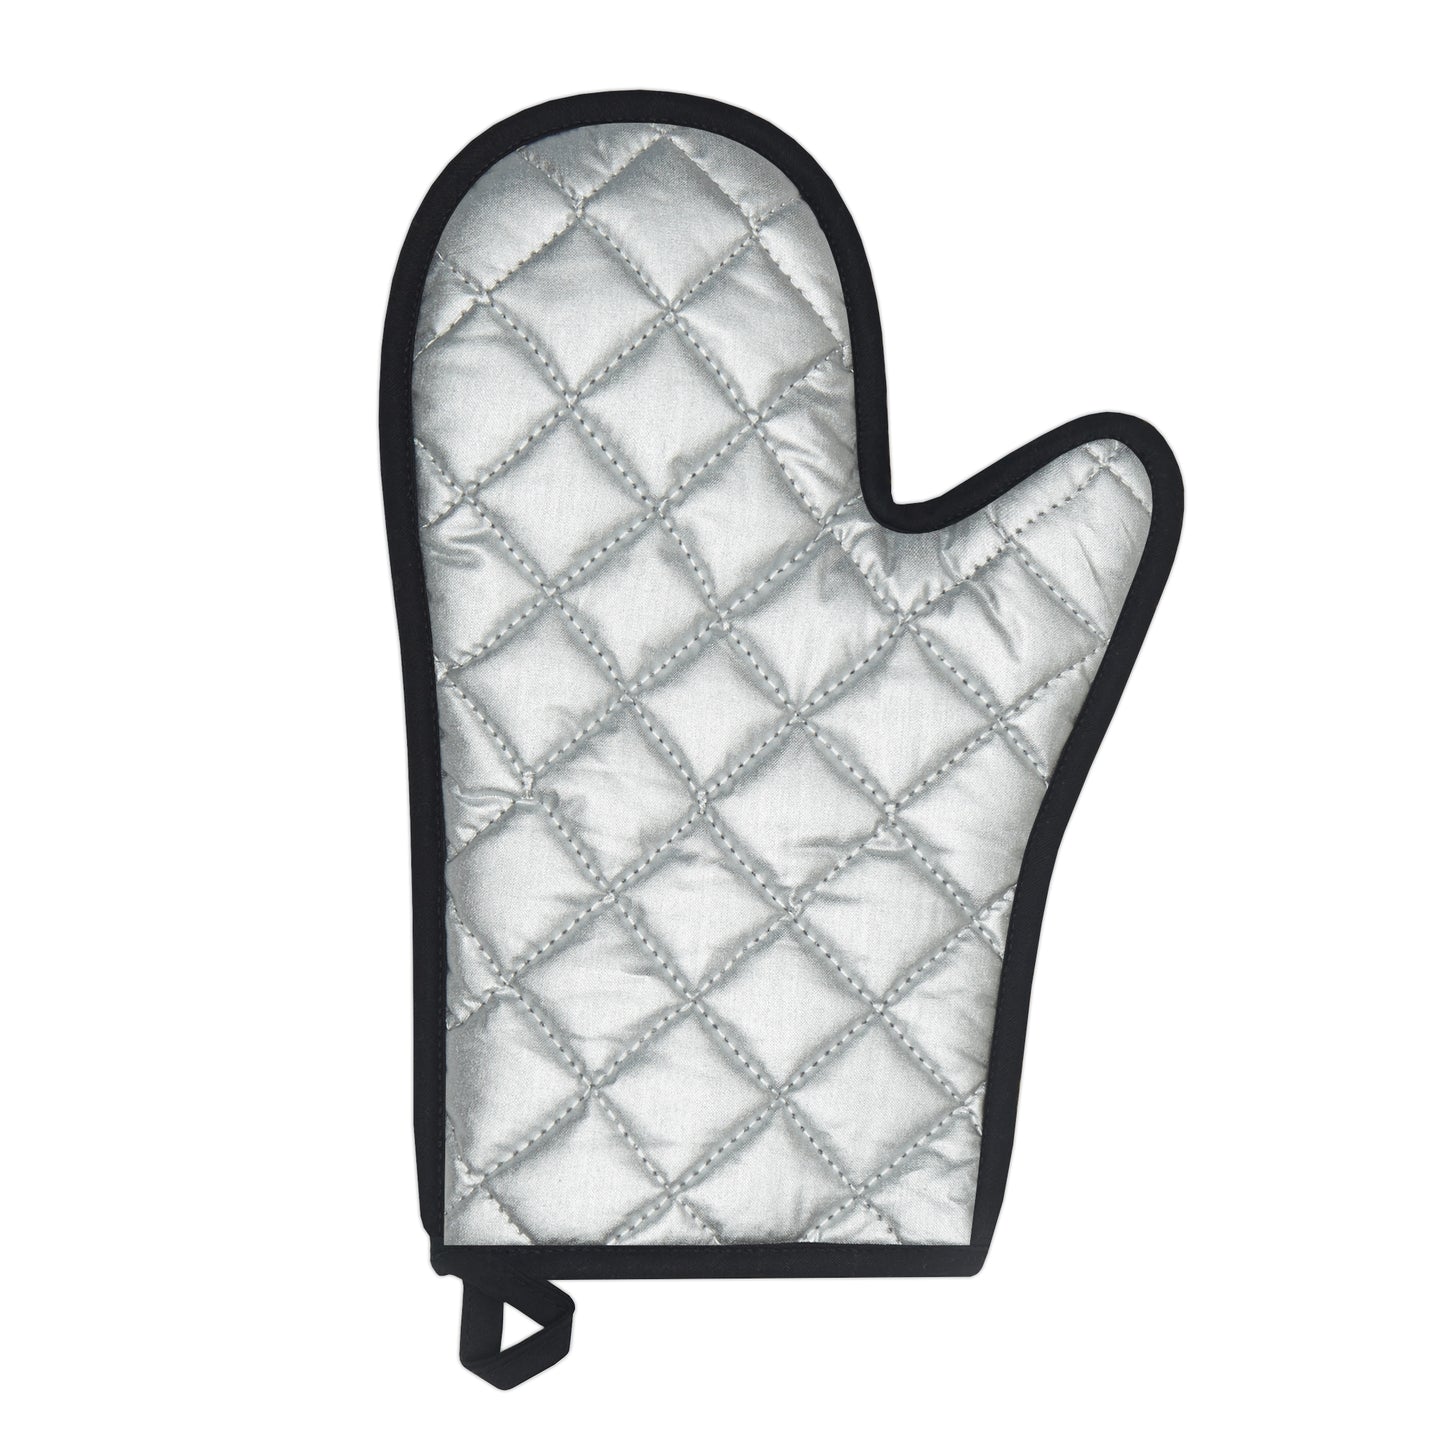 Ariana Grande 7 Rings Collage Oven Glove